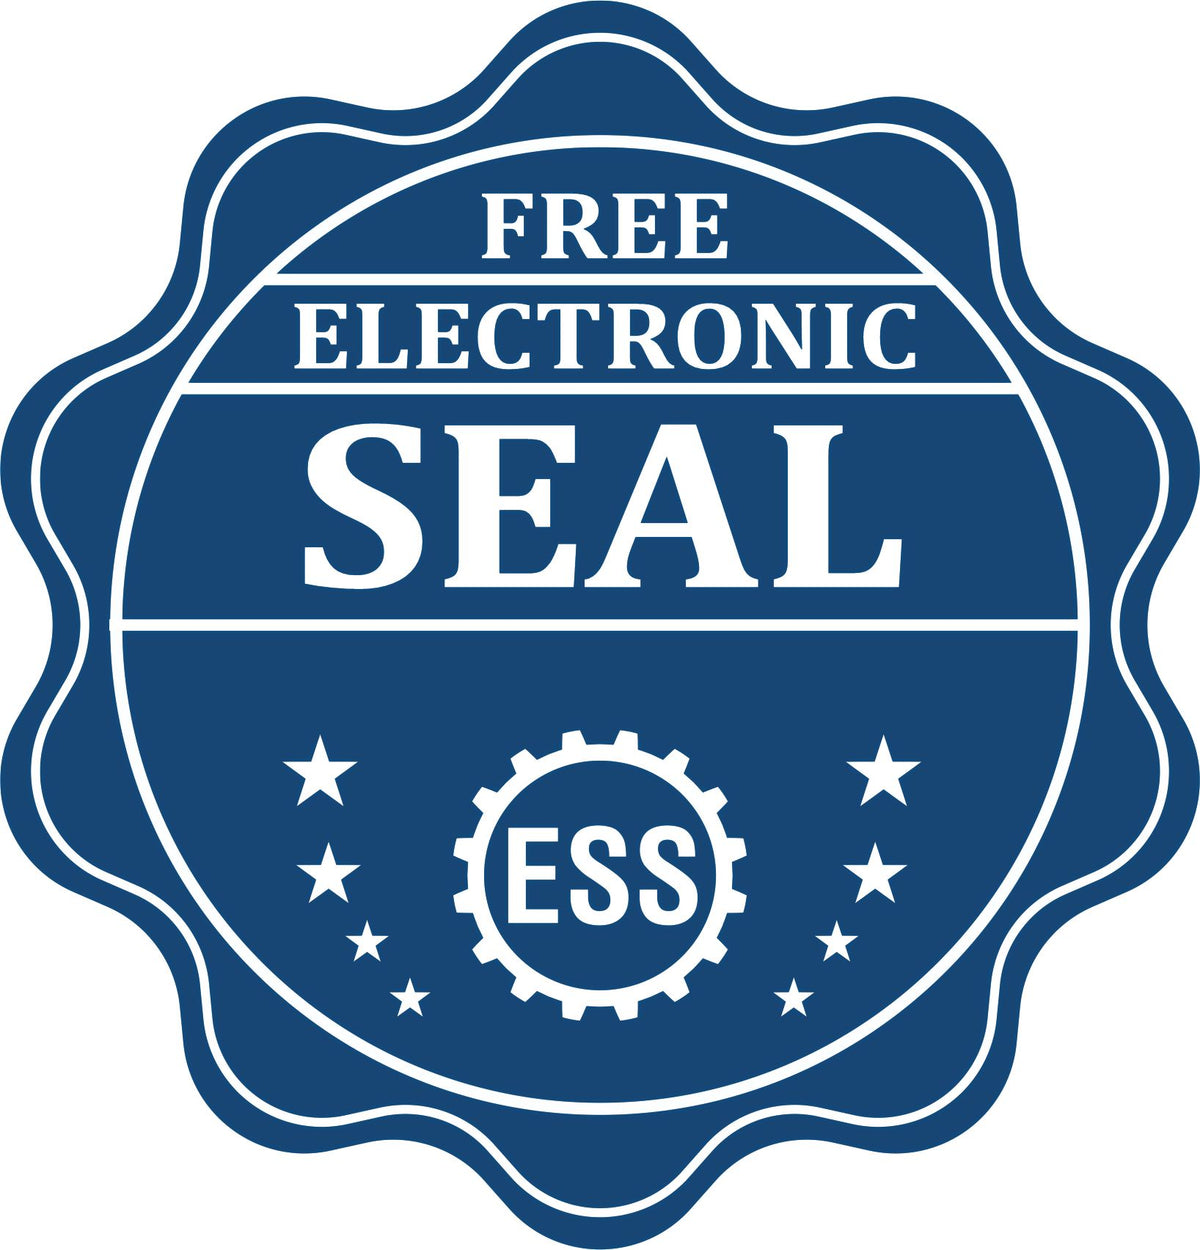 A badge showing a free electronic seal for the Handheld New Jersey Professional Geologist Embosser with stars and the ESS gear on the emblem.